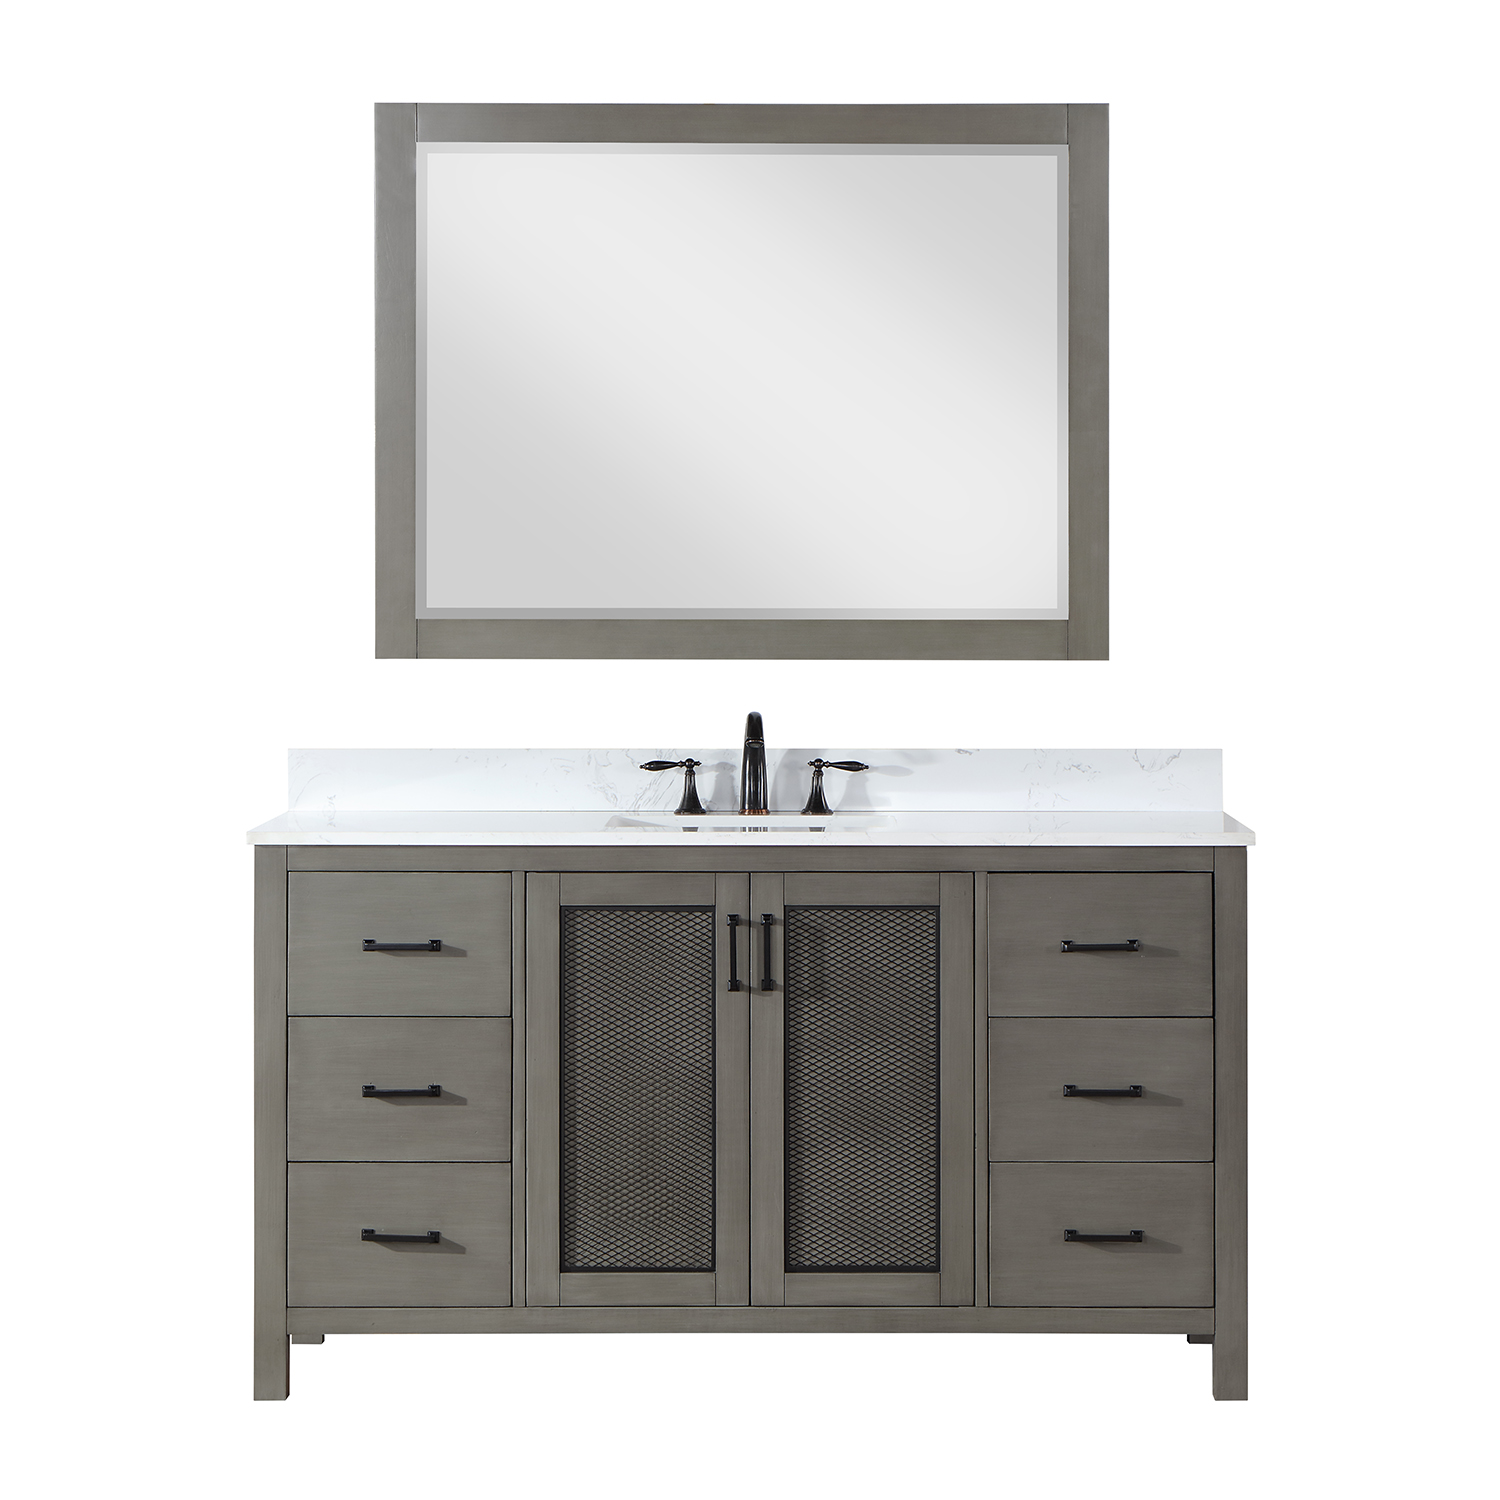 Issac Edwards Collection 60" Single Bathroom Vanity Set in Gray Pine with Carrara White Composite Stone Countertop without Mirror 